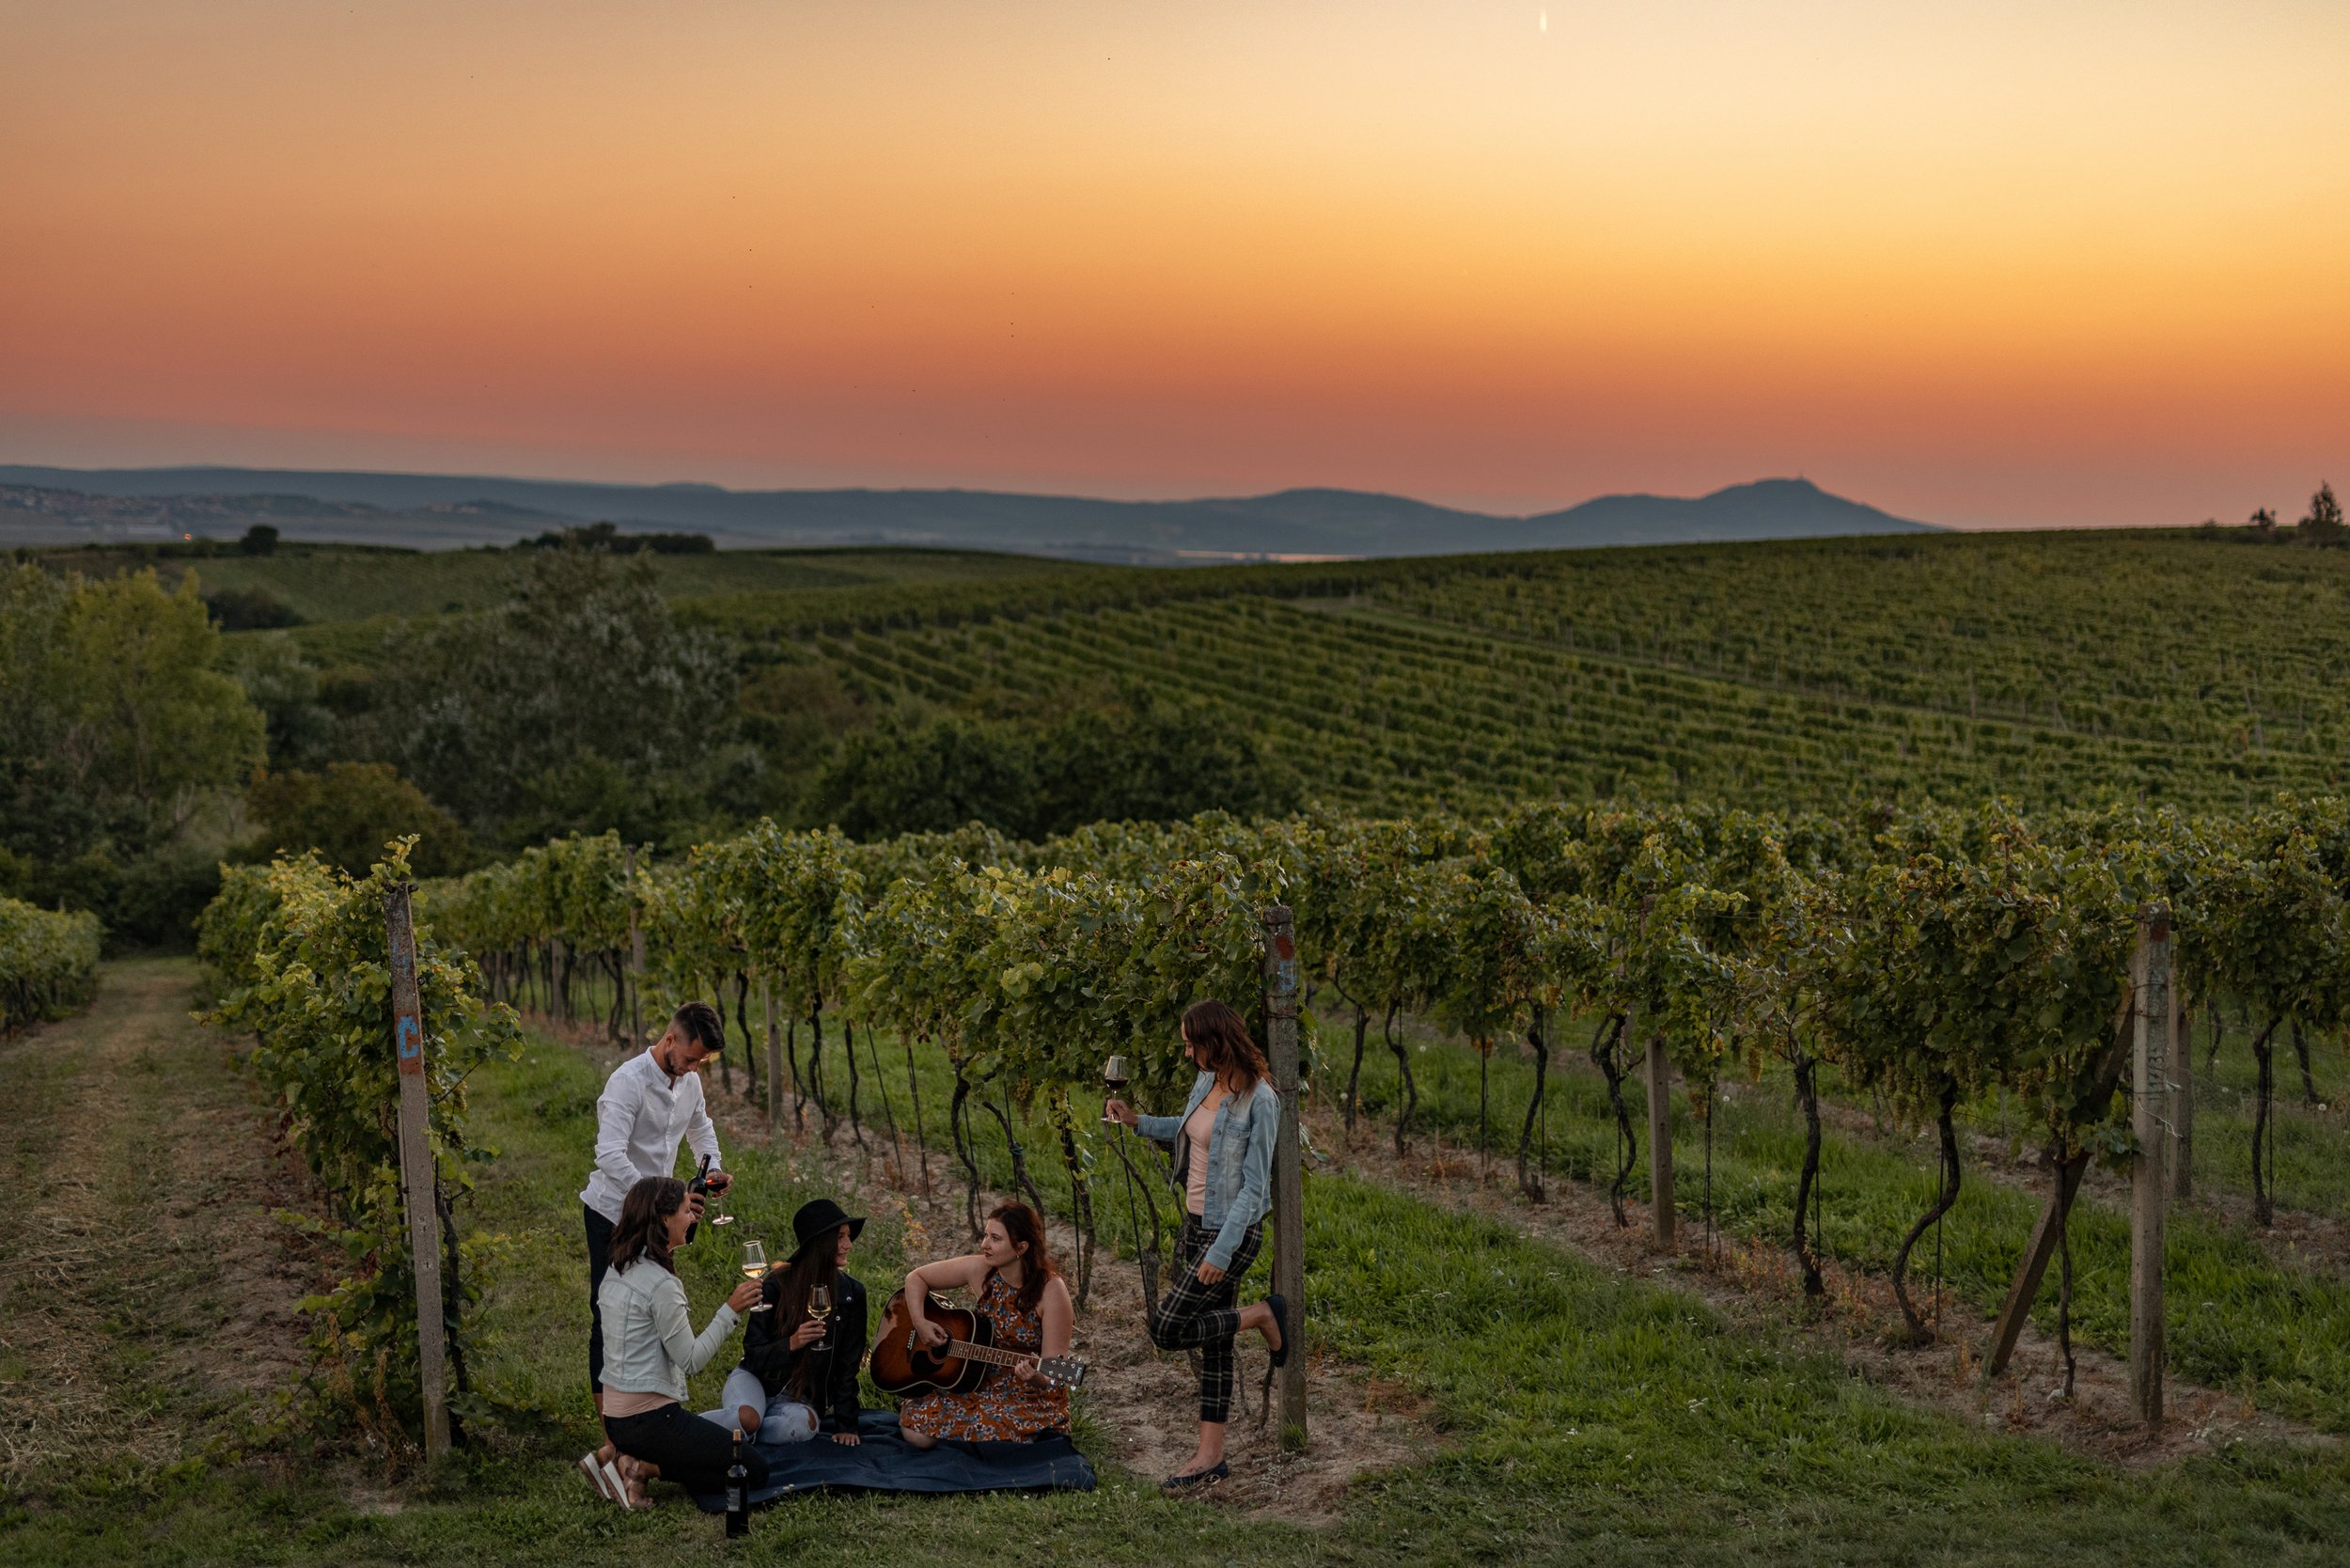 Villagers enjoy the fruits of their labours in the Moravia countryside;